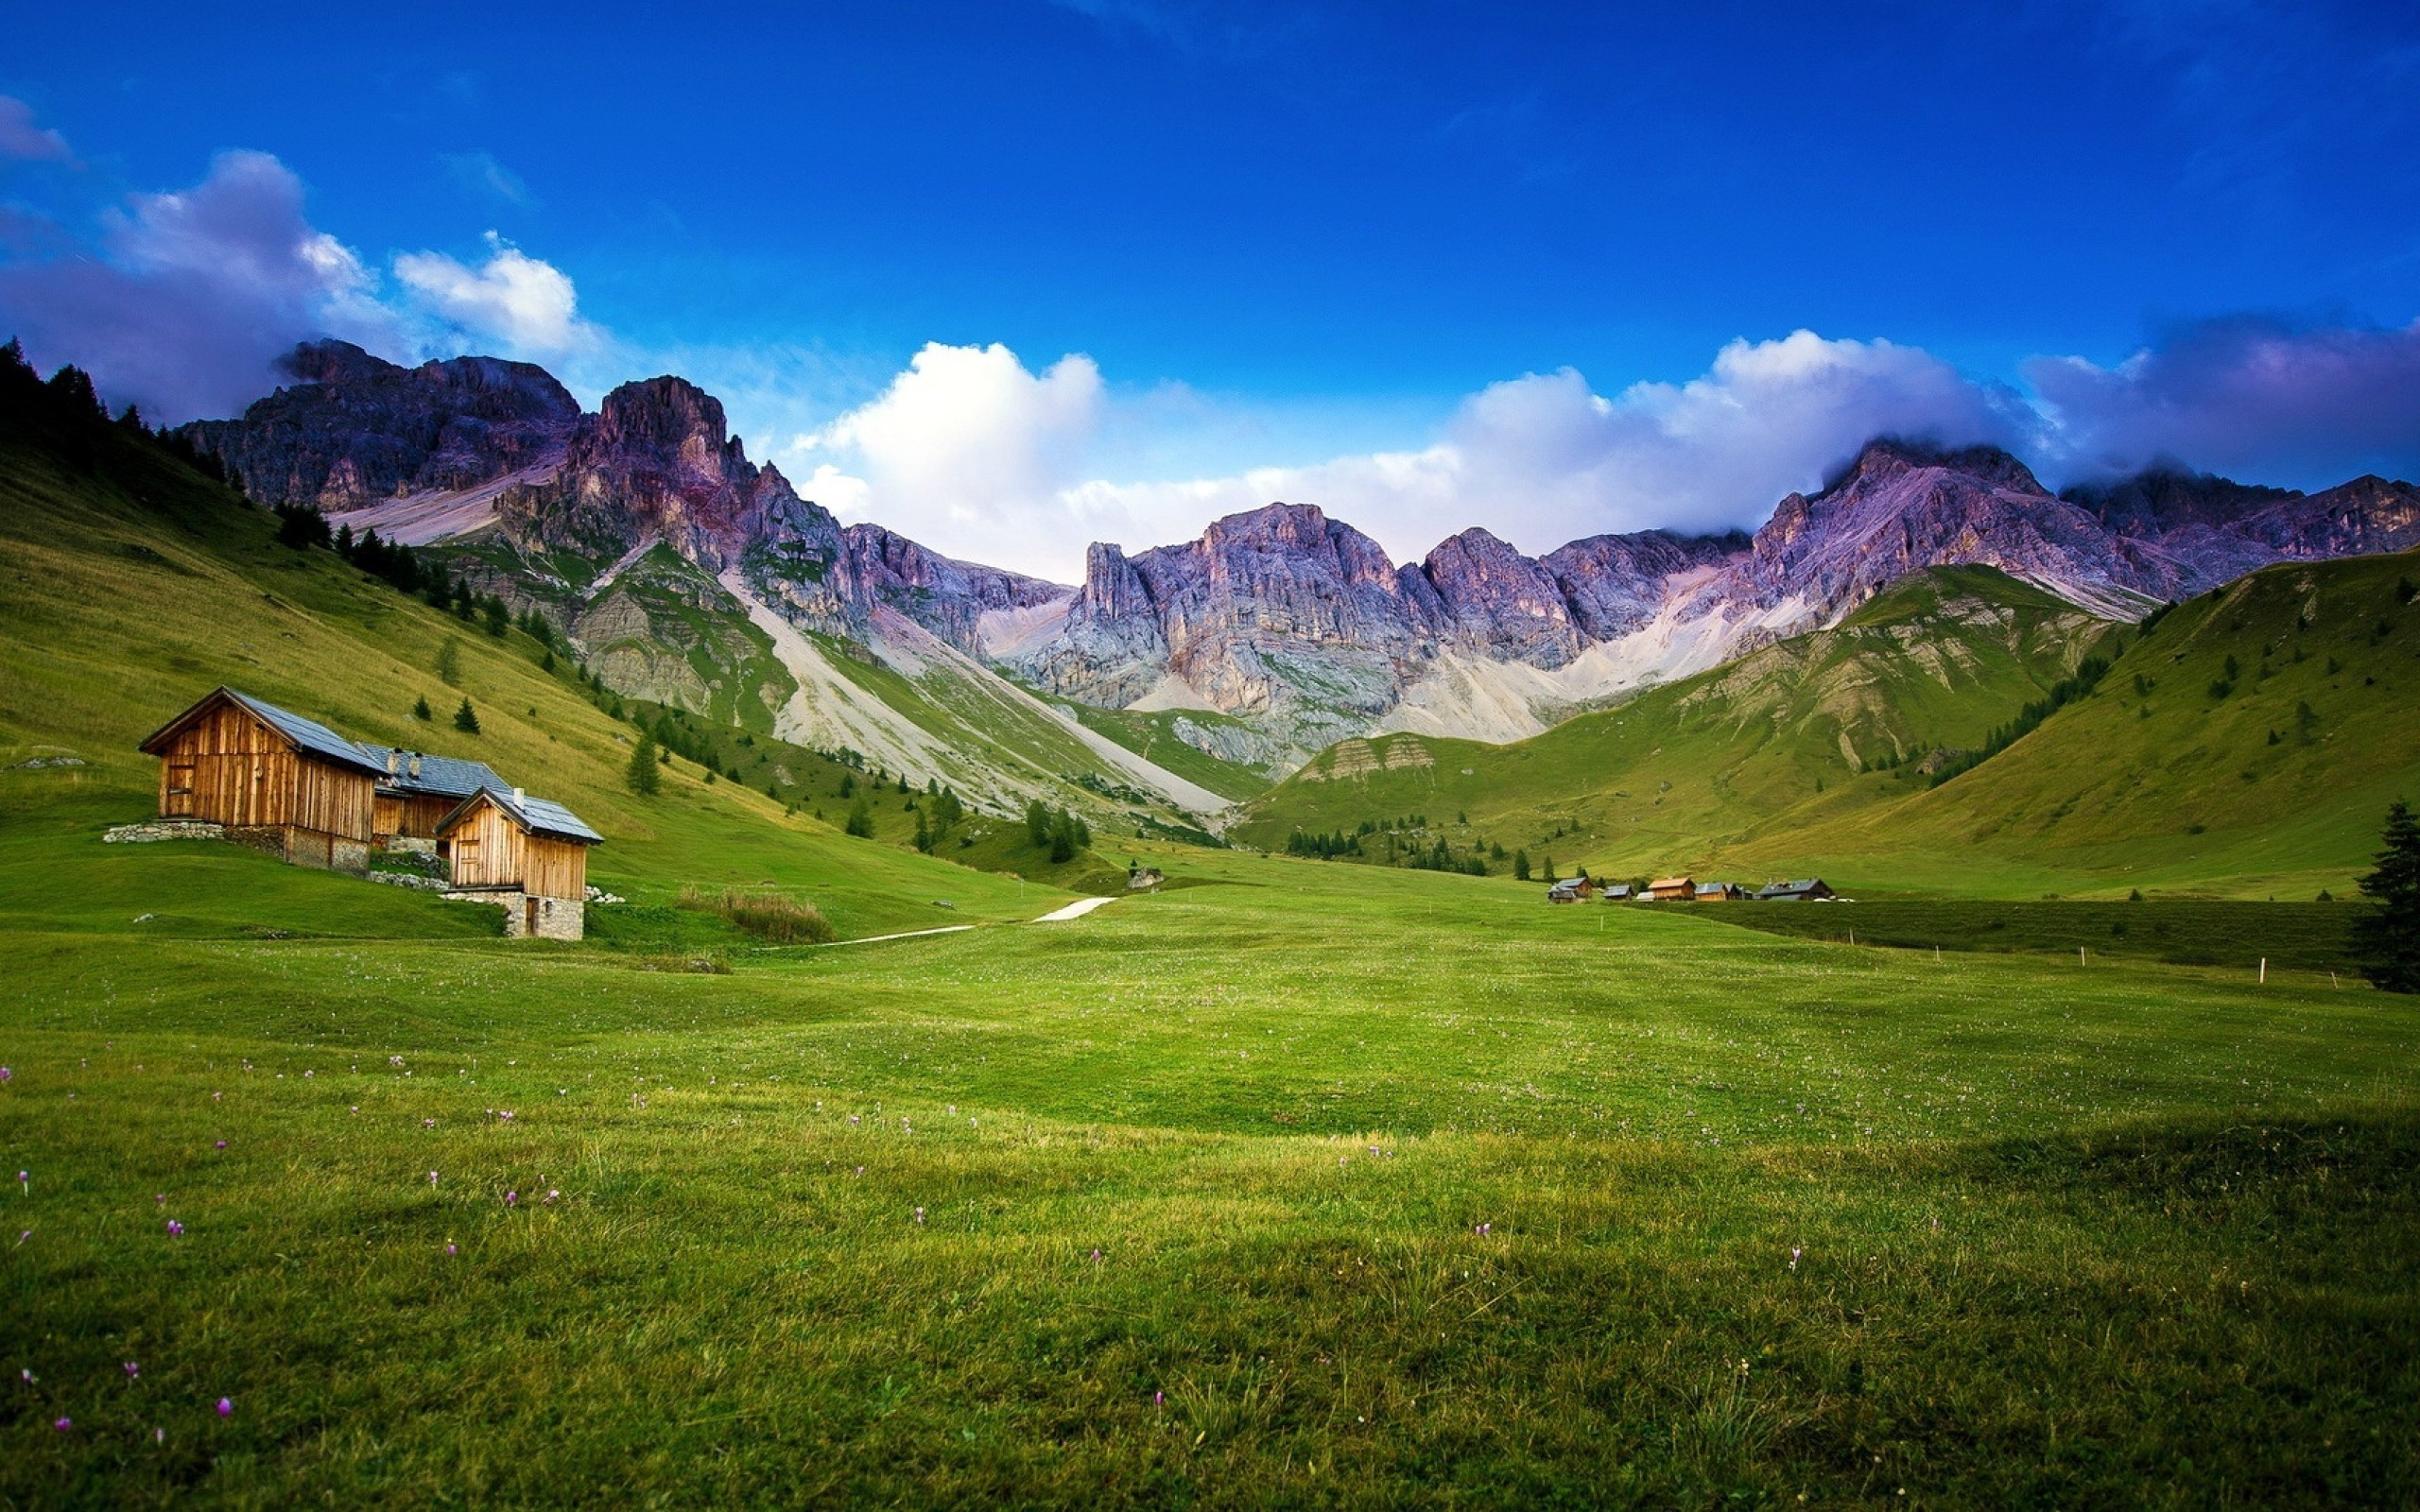 General 2560x1600 valley cabin mountains nature landscape